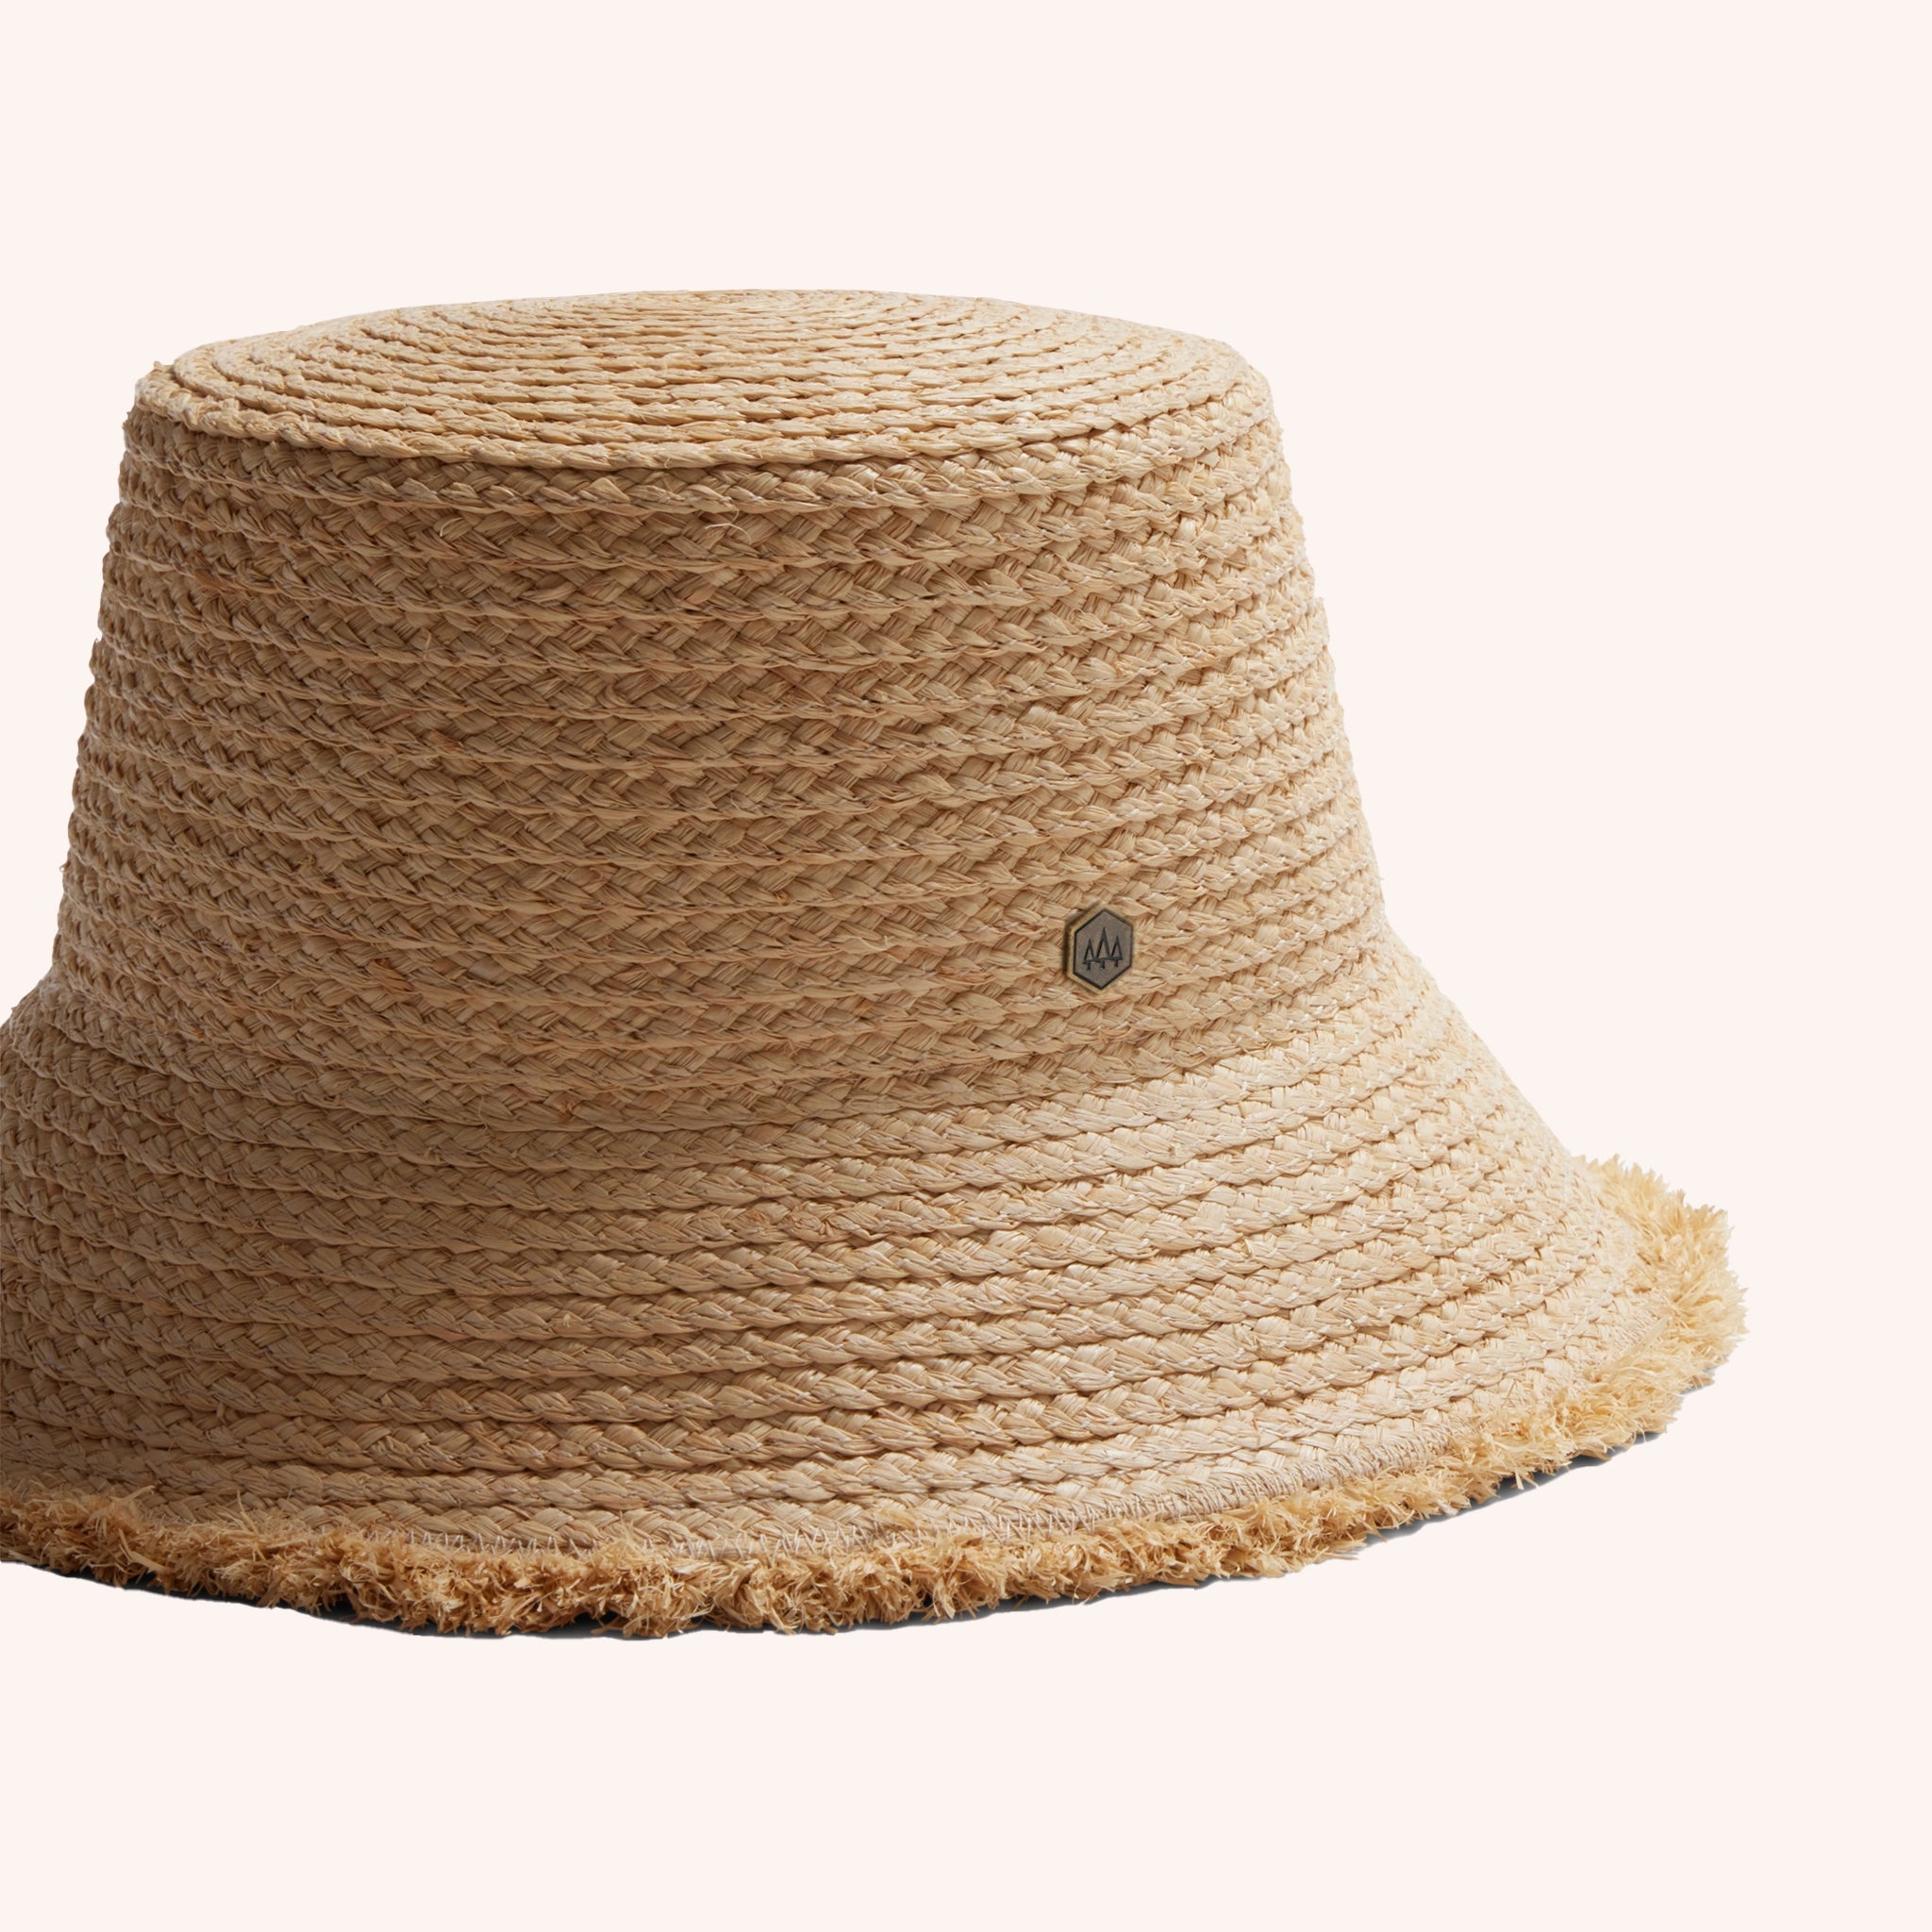 A woven bucket hat in a light straw color with a frayed edge detail along the edge of the brim and a tiny hemlock hat metal emblem in the center.